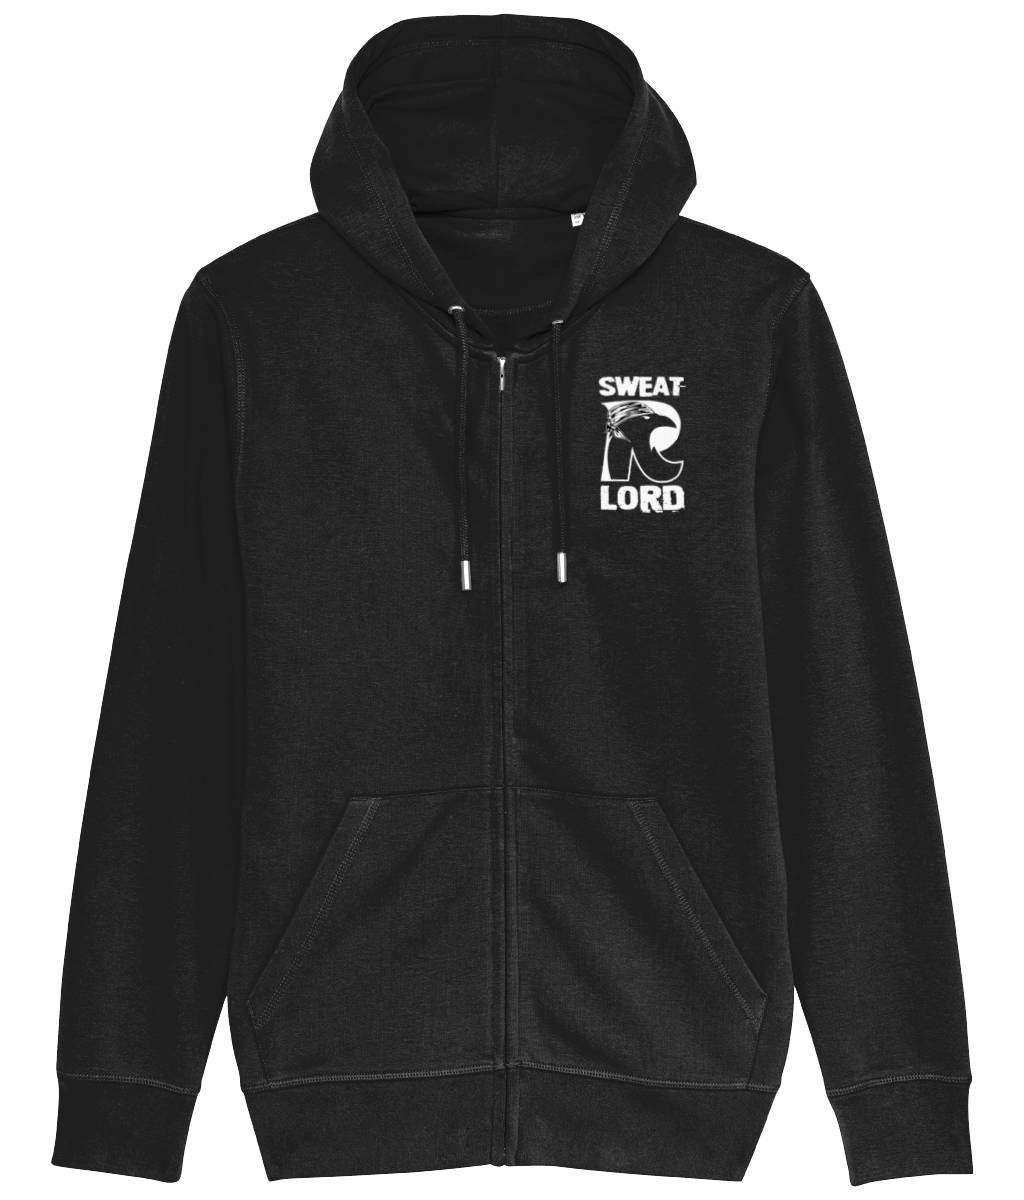 Rob Raven 'Sweat Lord' Zip Connector Hoodie